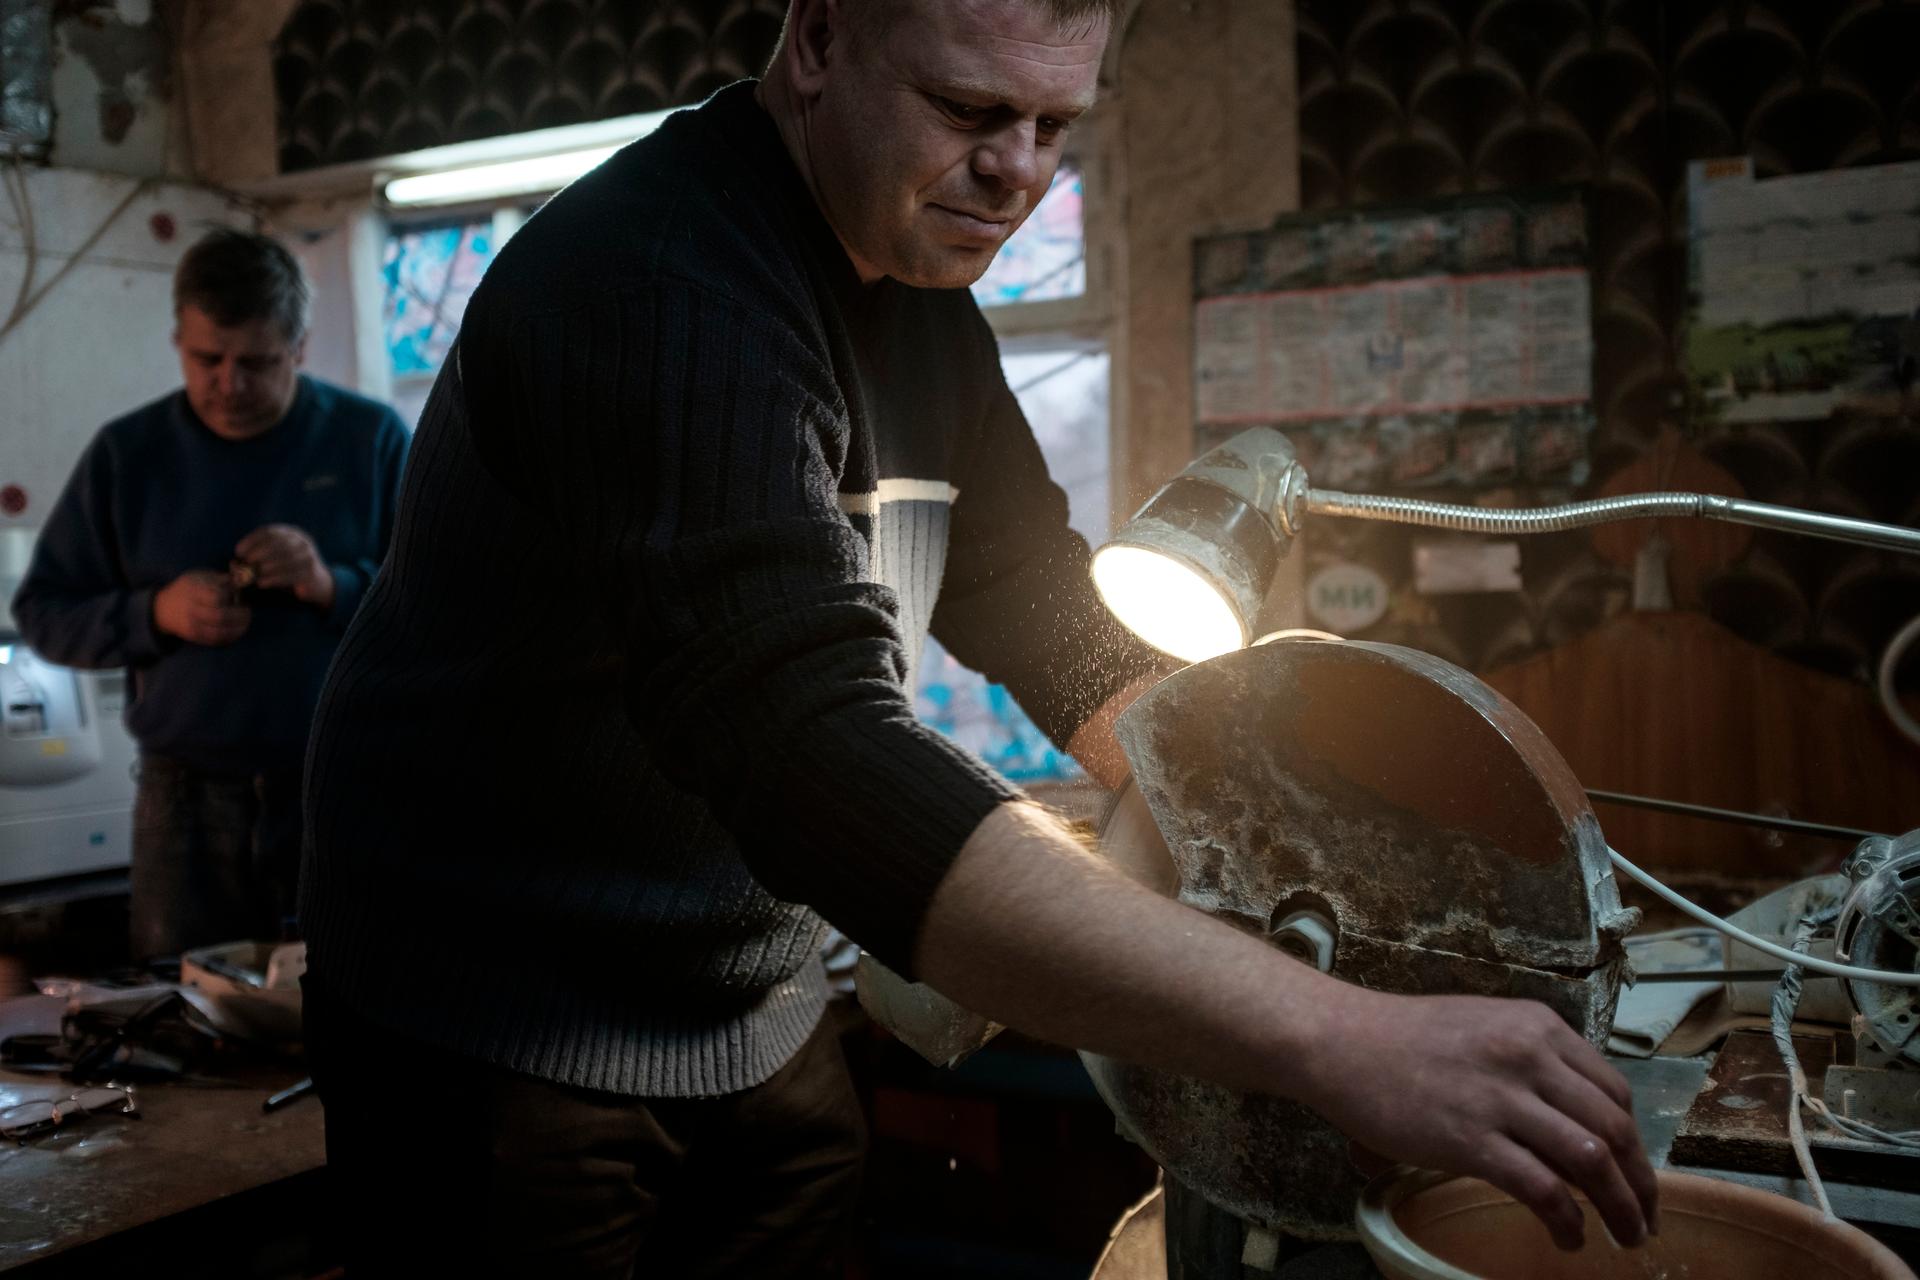 A man in shadow works at a grinder